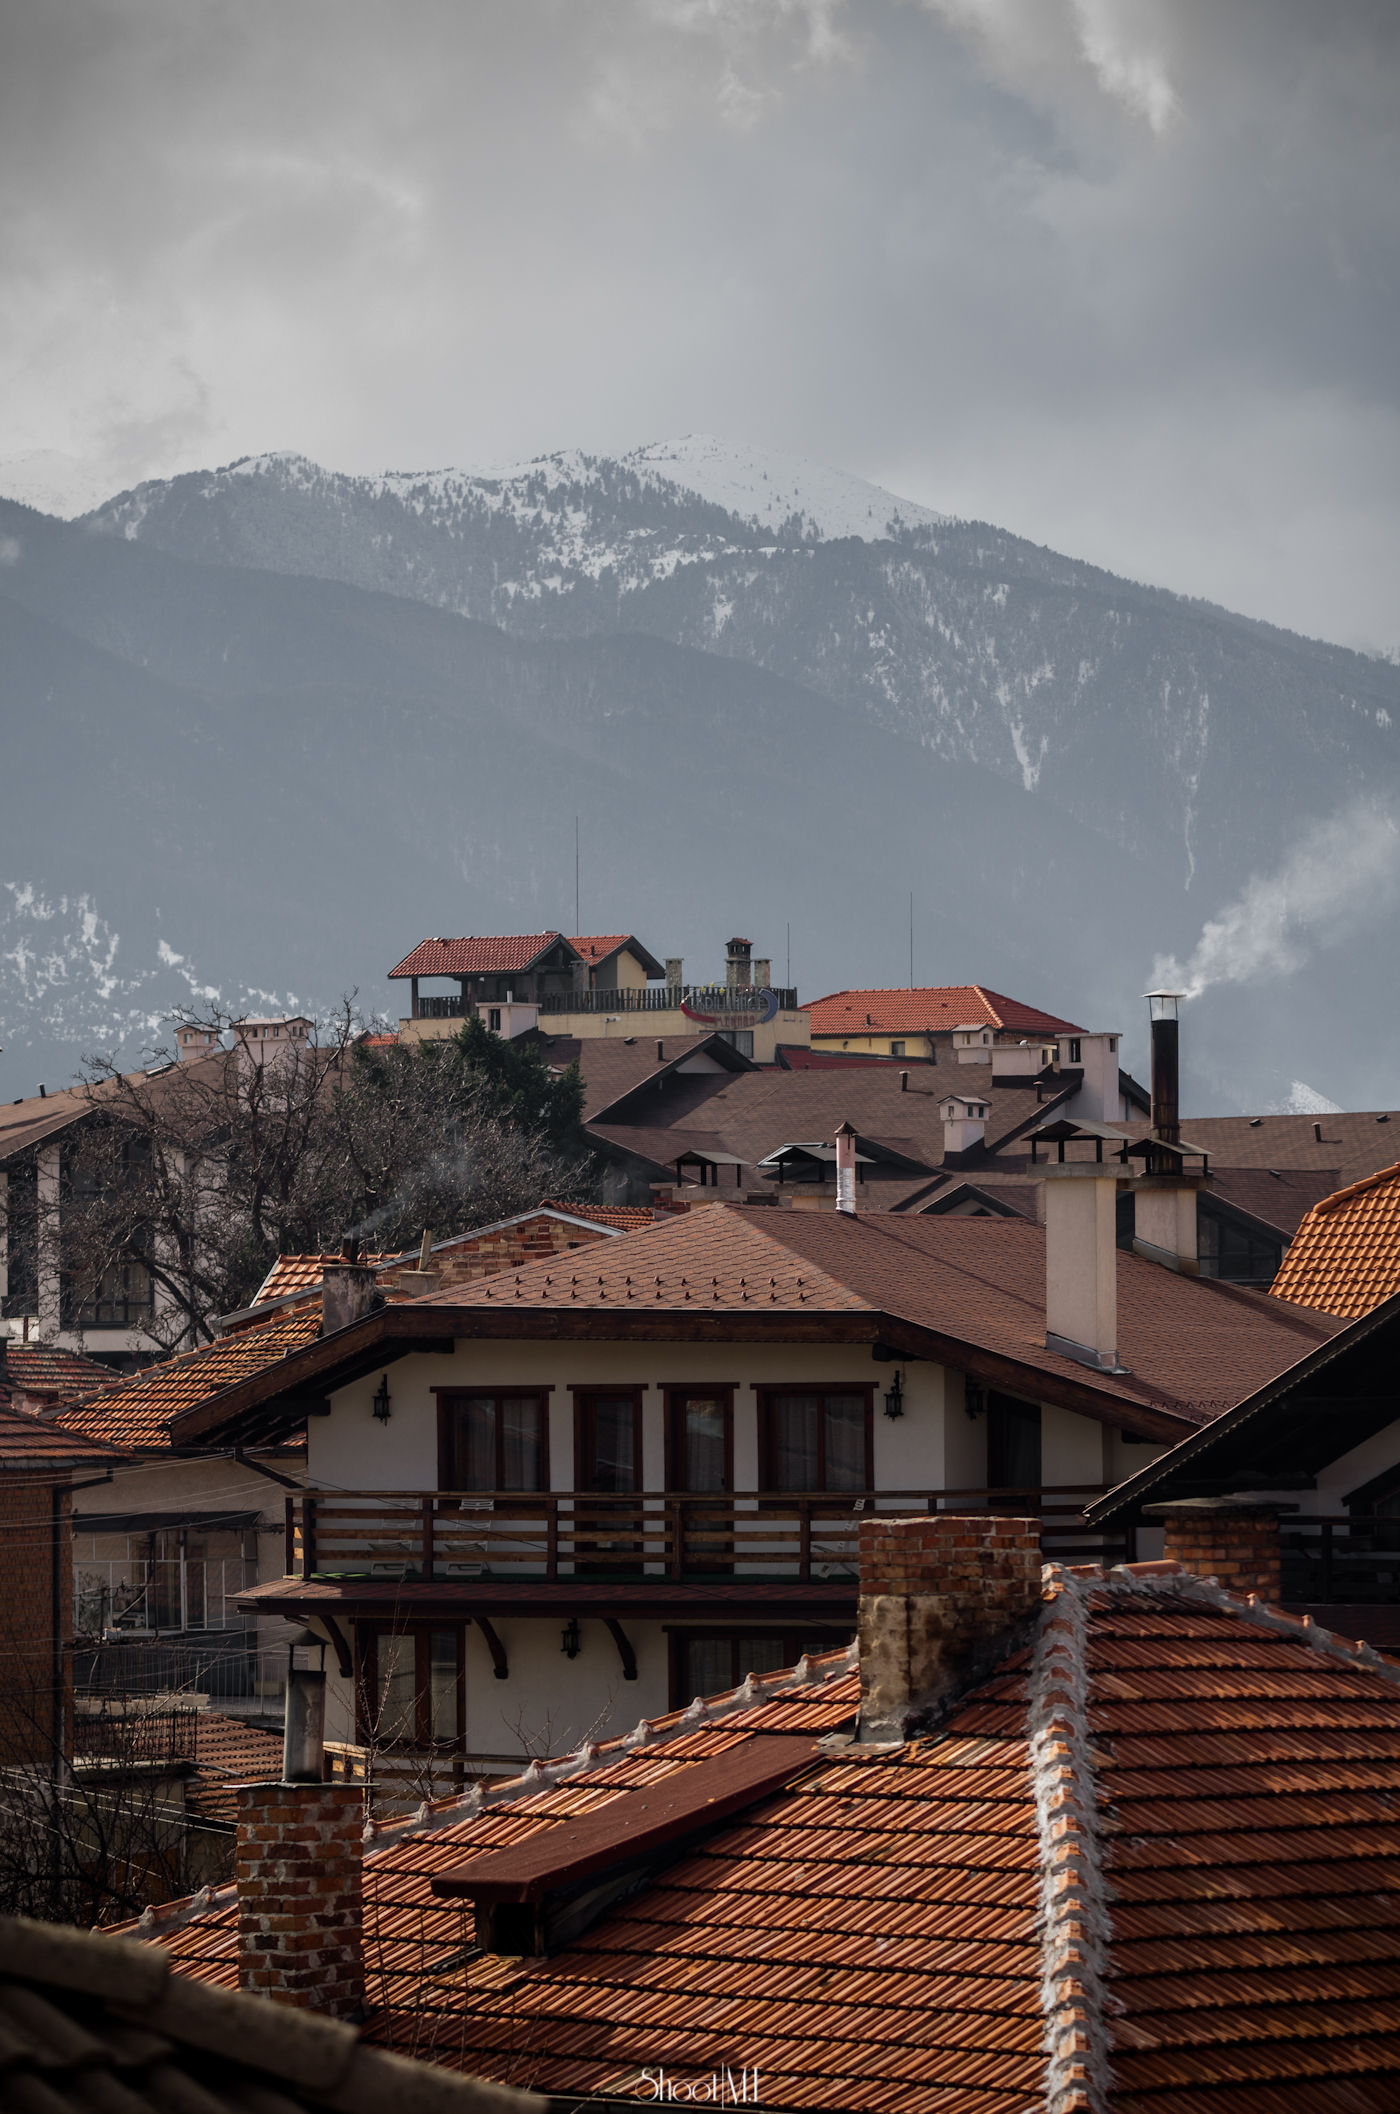 houses in the city with snow covered mountains in the background